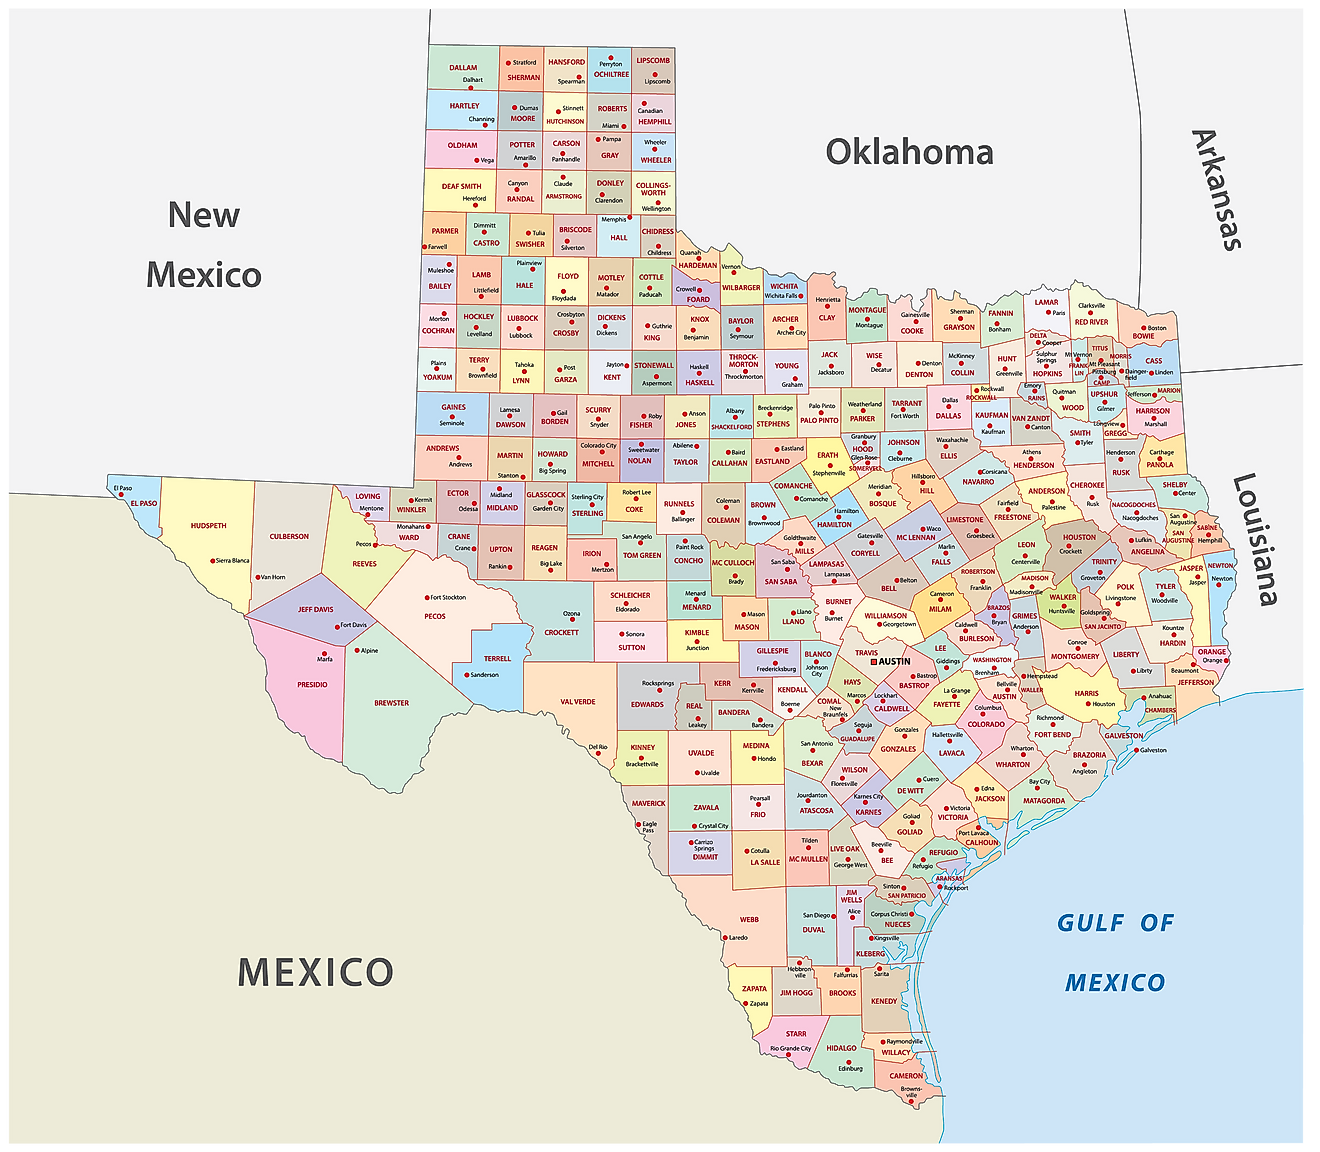 tx map with cities